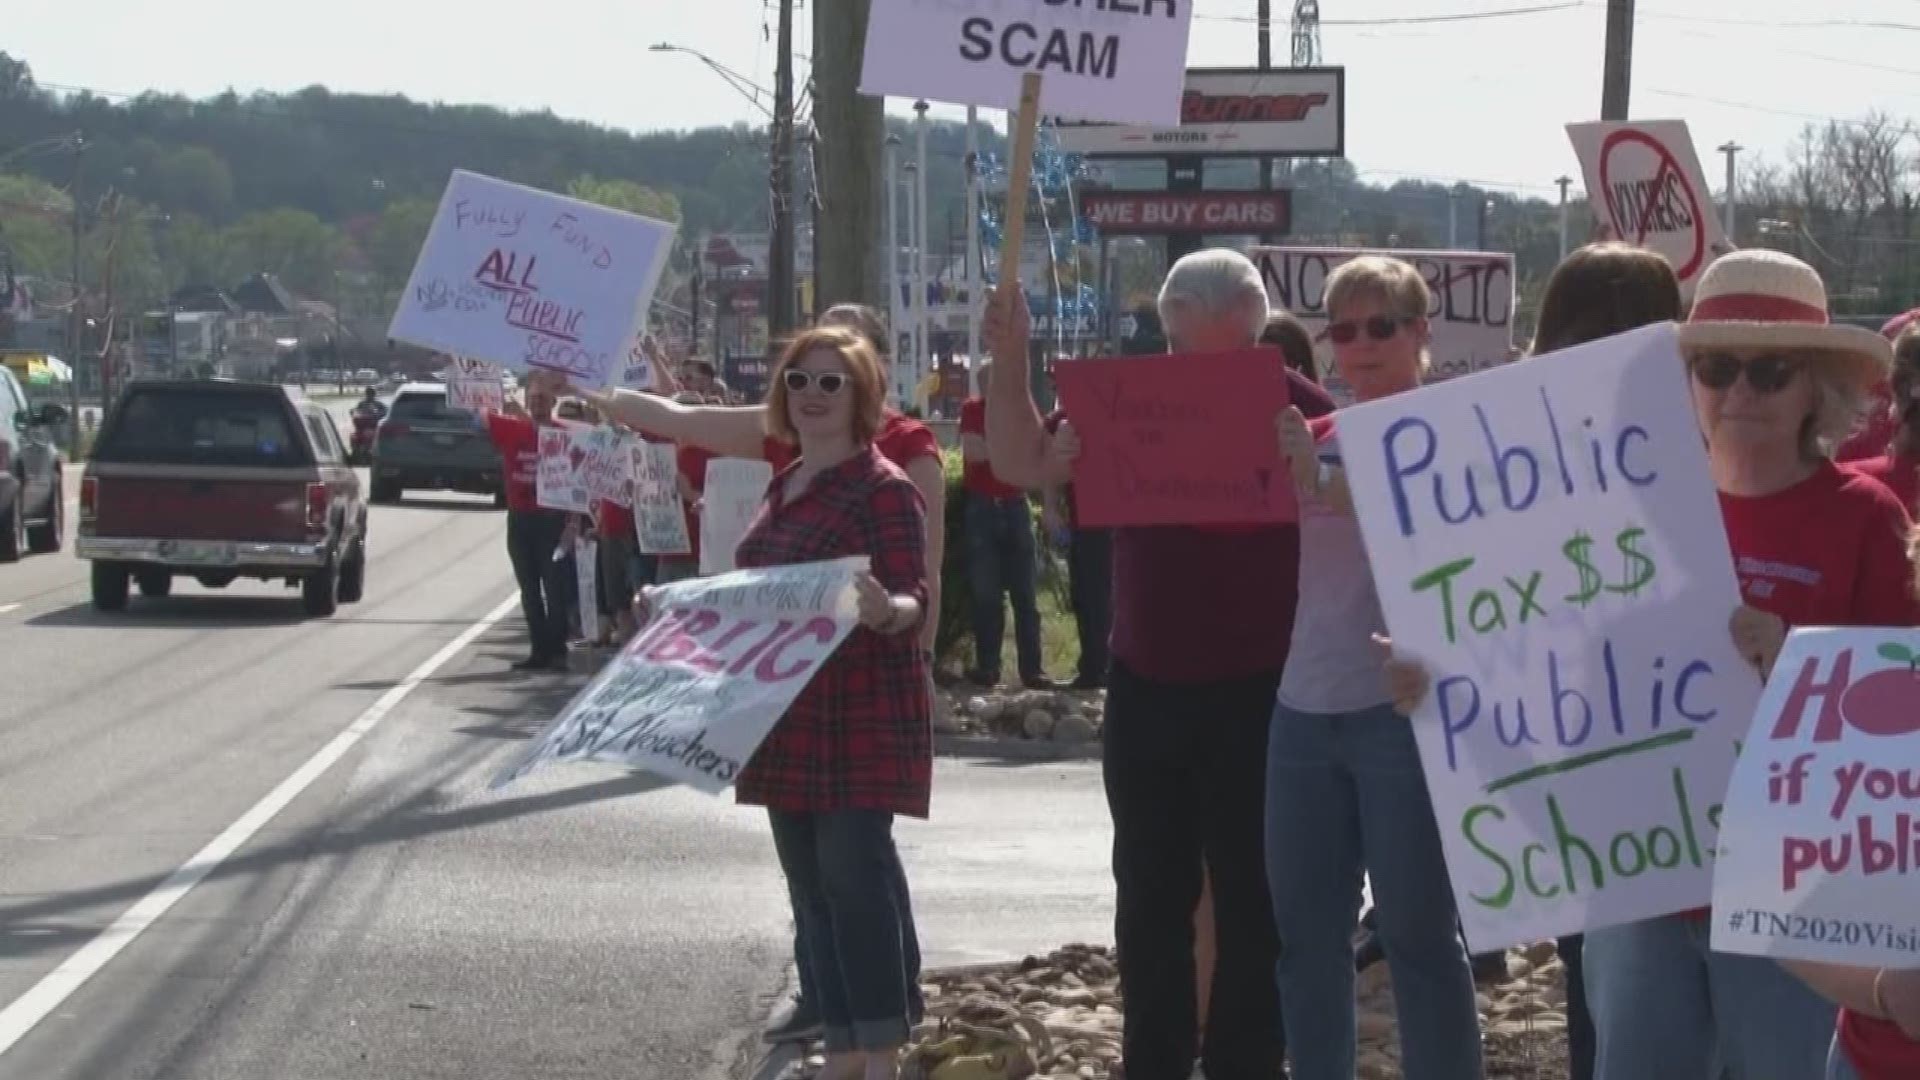 More than 150 protestors from the Tennessee Education Association protested the governor's voucher program, which would allow qualified students in failing schools go to a private school with taxpayer dollars.